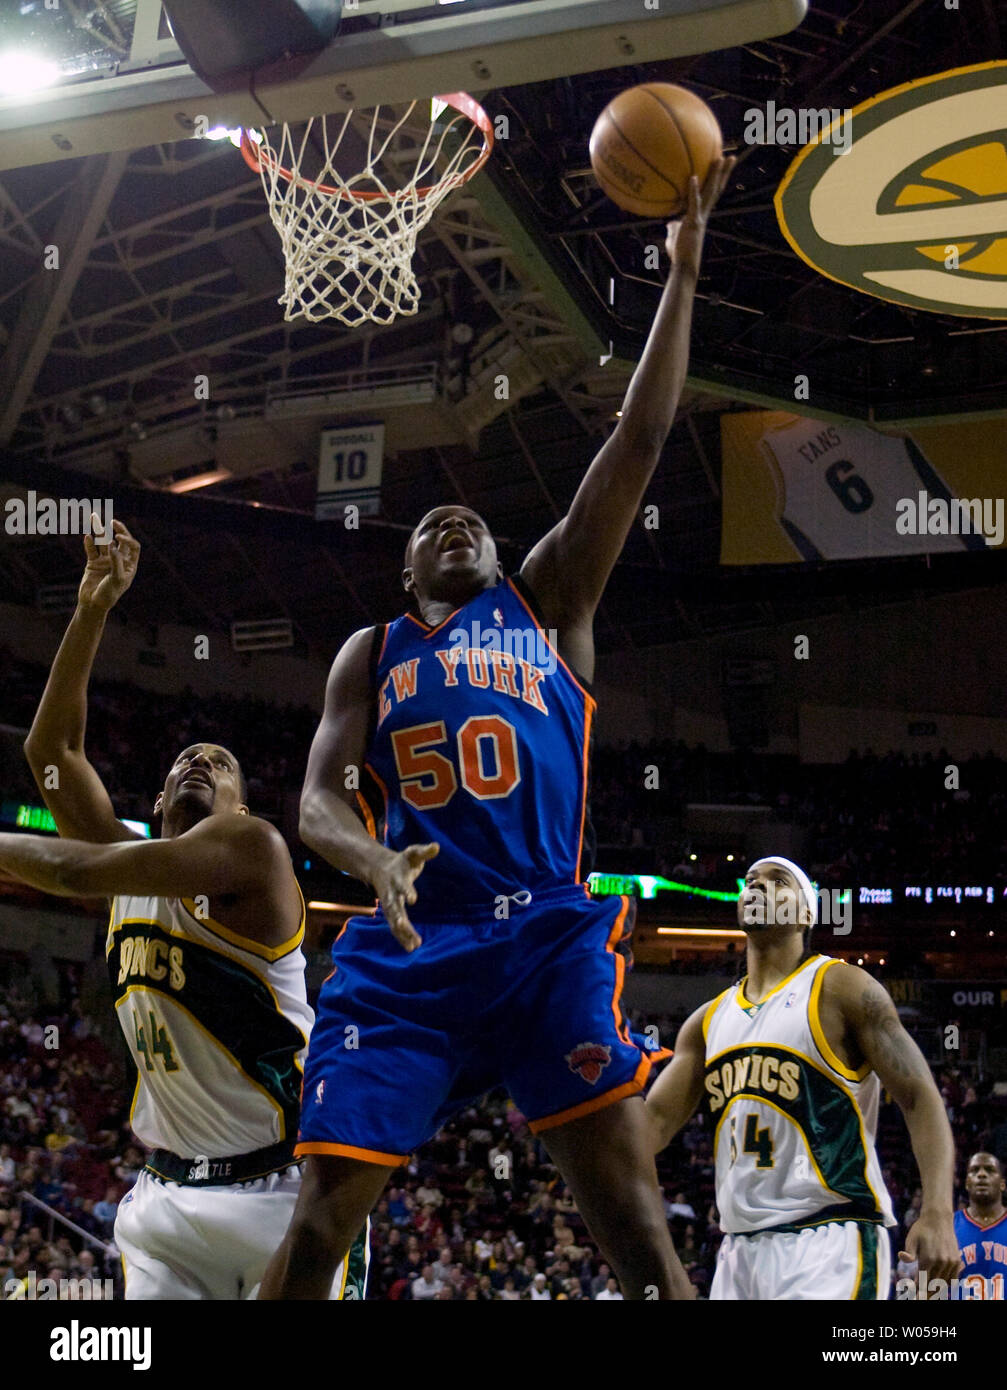 New York Knicks' Zach Randolph  hits a layup between Seattle SuperSonics' Kurt Thomas (L) and Chris Wilcox (R) during the first half at the Key Arena in Seattle on February 2, 2008. randolph led all scorers with 24 points in the Knicks 85-86 loss to the SuperSonics. (UPI Photo/Jim Bryant) Stock Photo